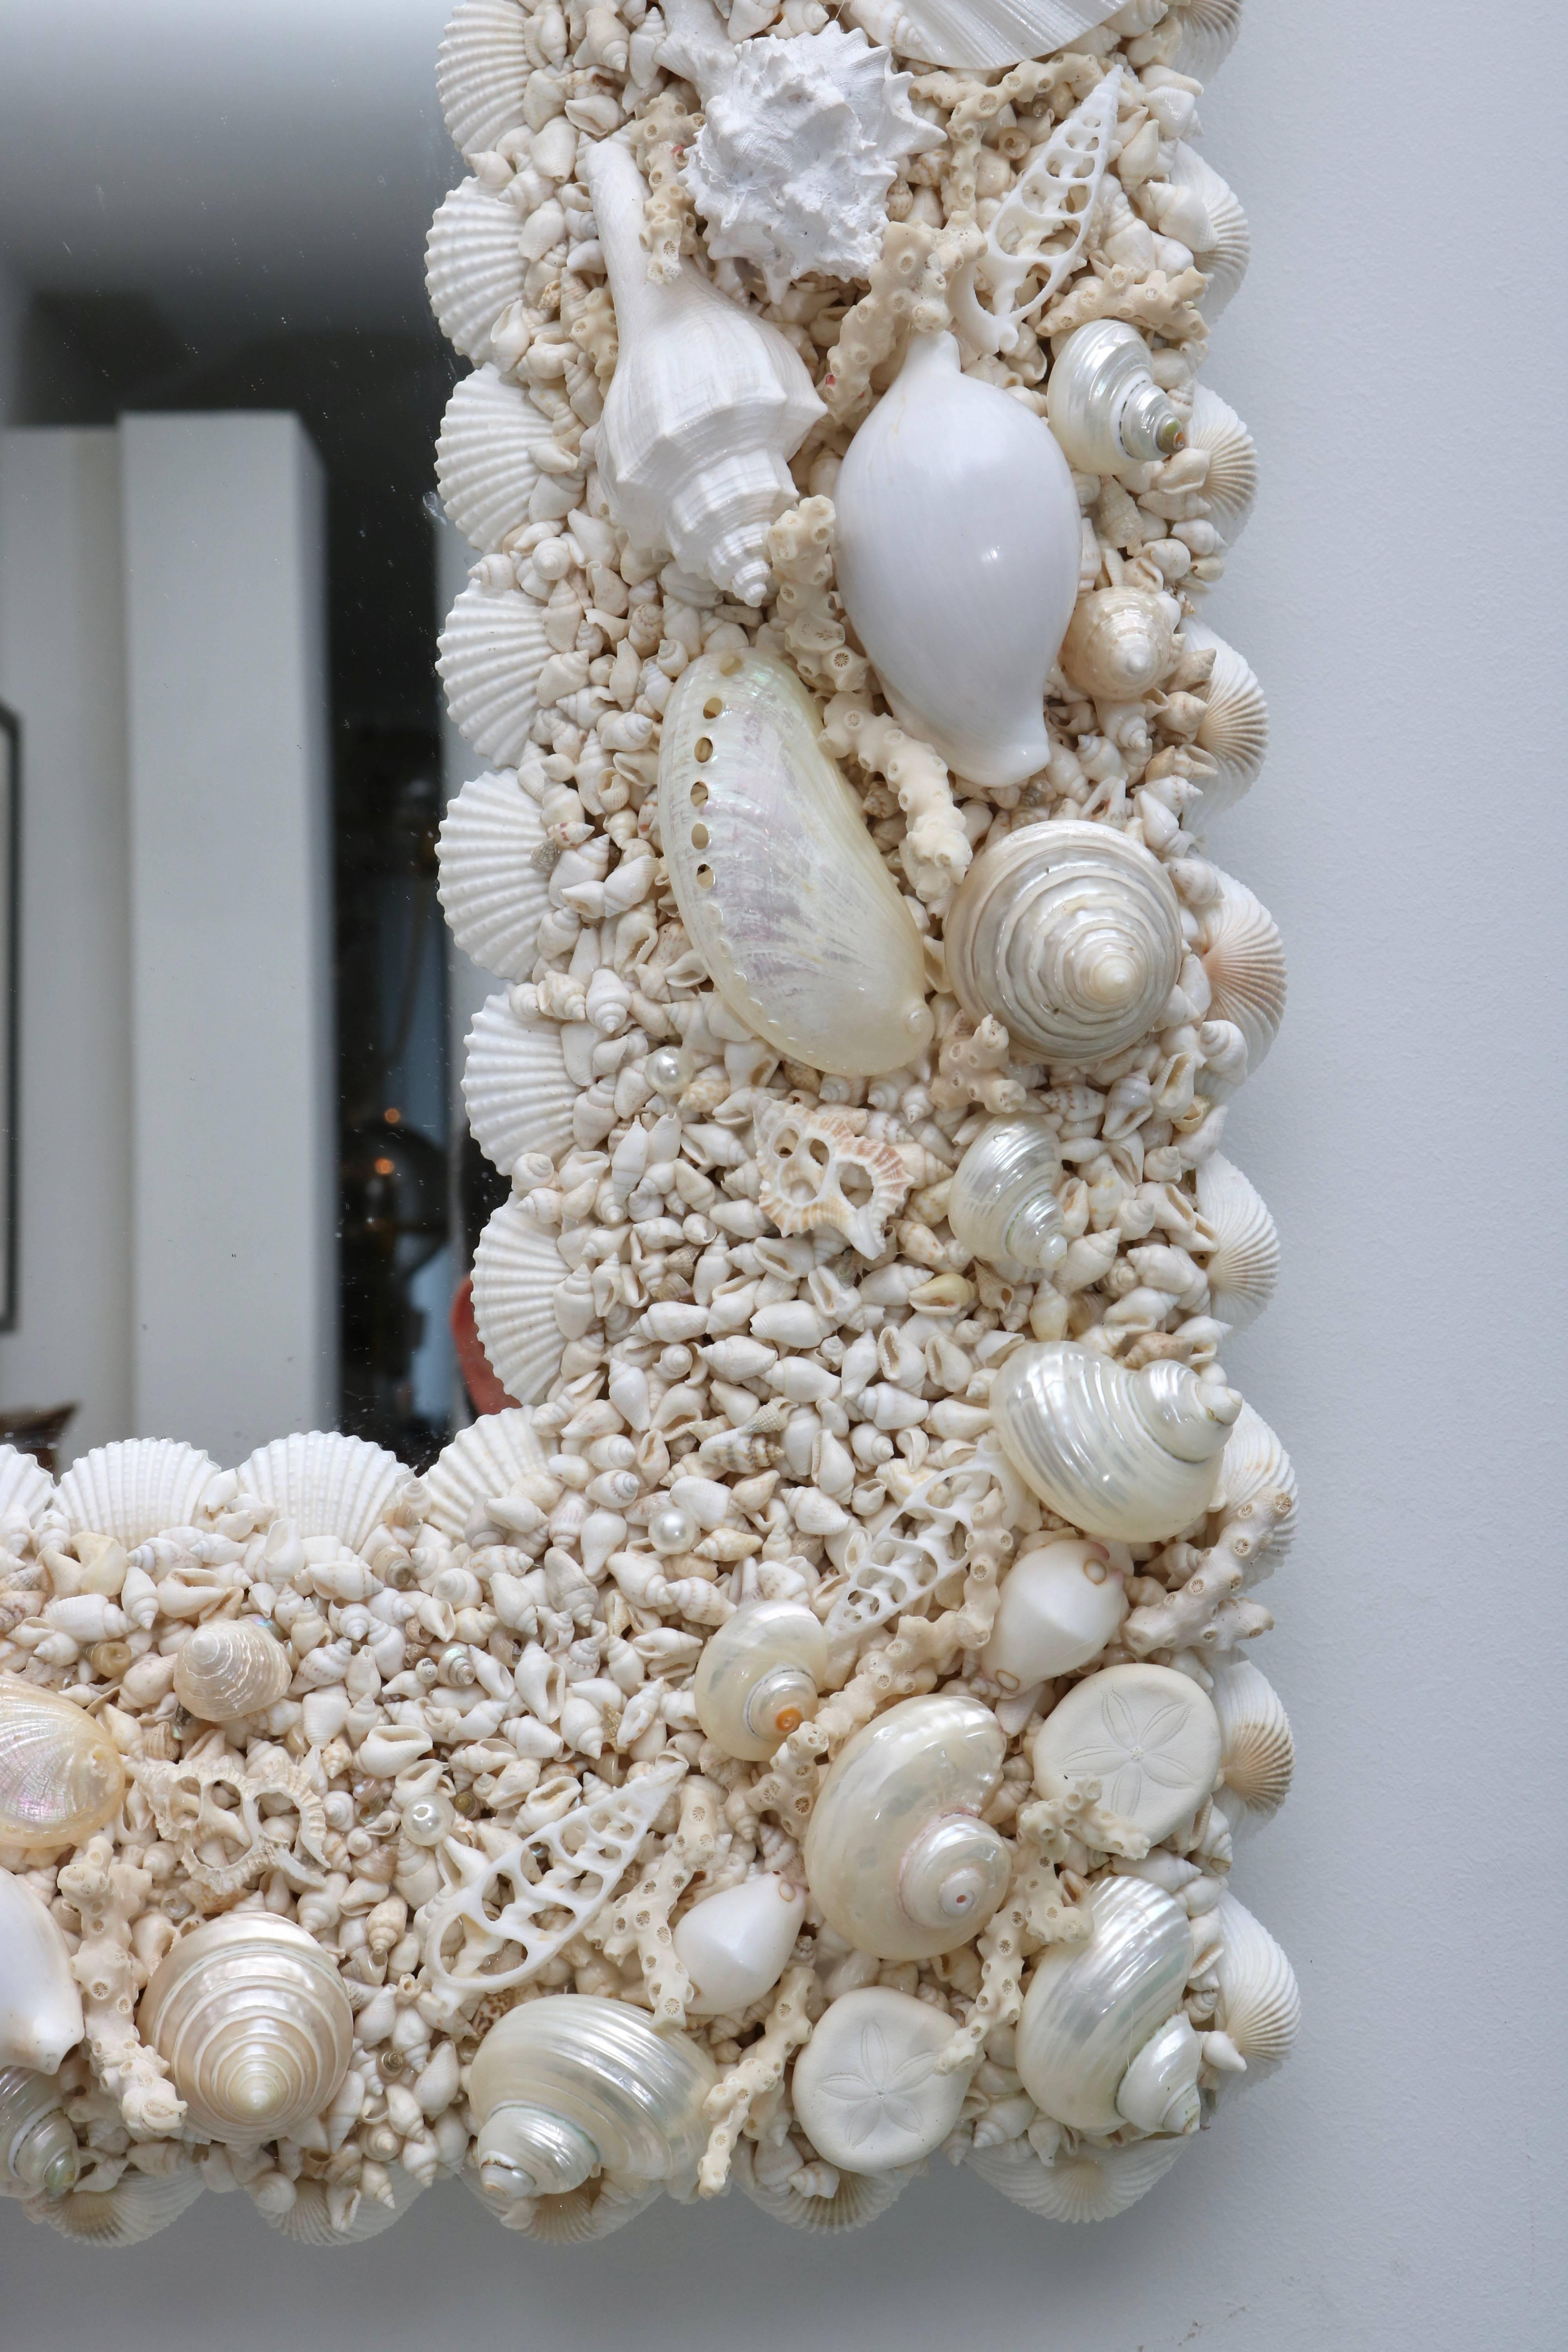 Hollywood Regency Tony Duquette Style Sea Shell Encrusted Mirror in White and Pearlized Coloration